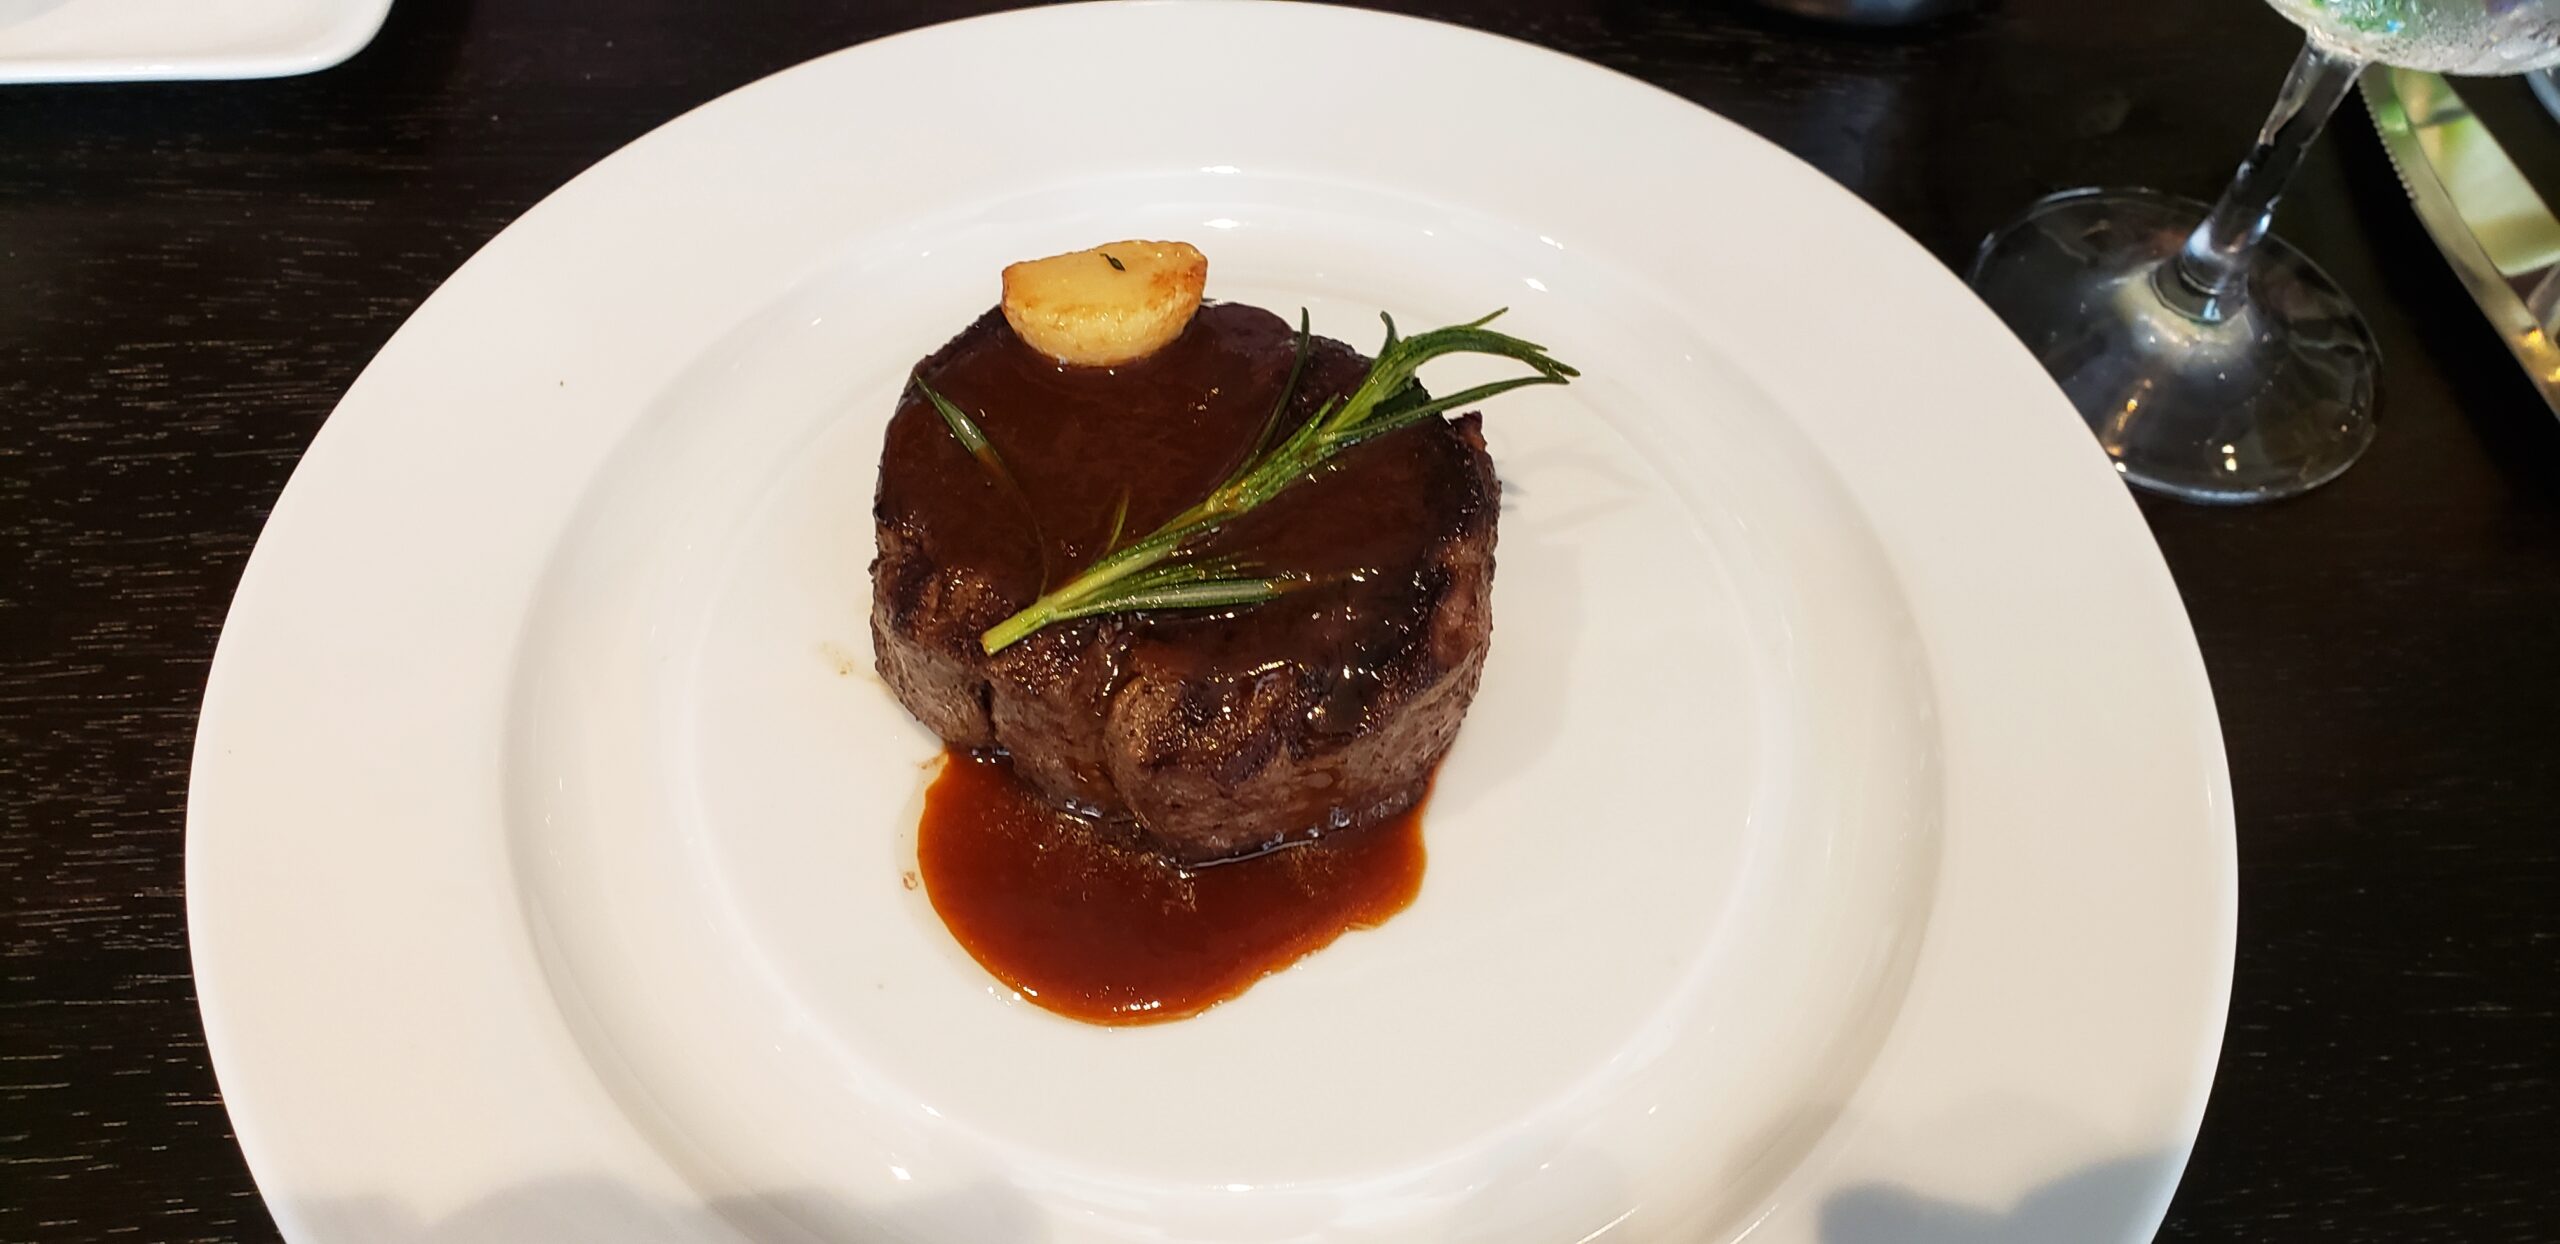 Eight-ounce Angus Filet Mignon at Chops, the steakhouse on Wonder of the Seas. Photo by Susan J. Young 